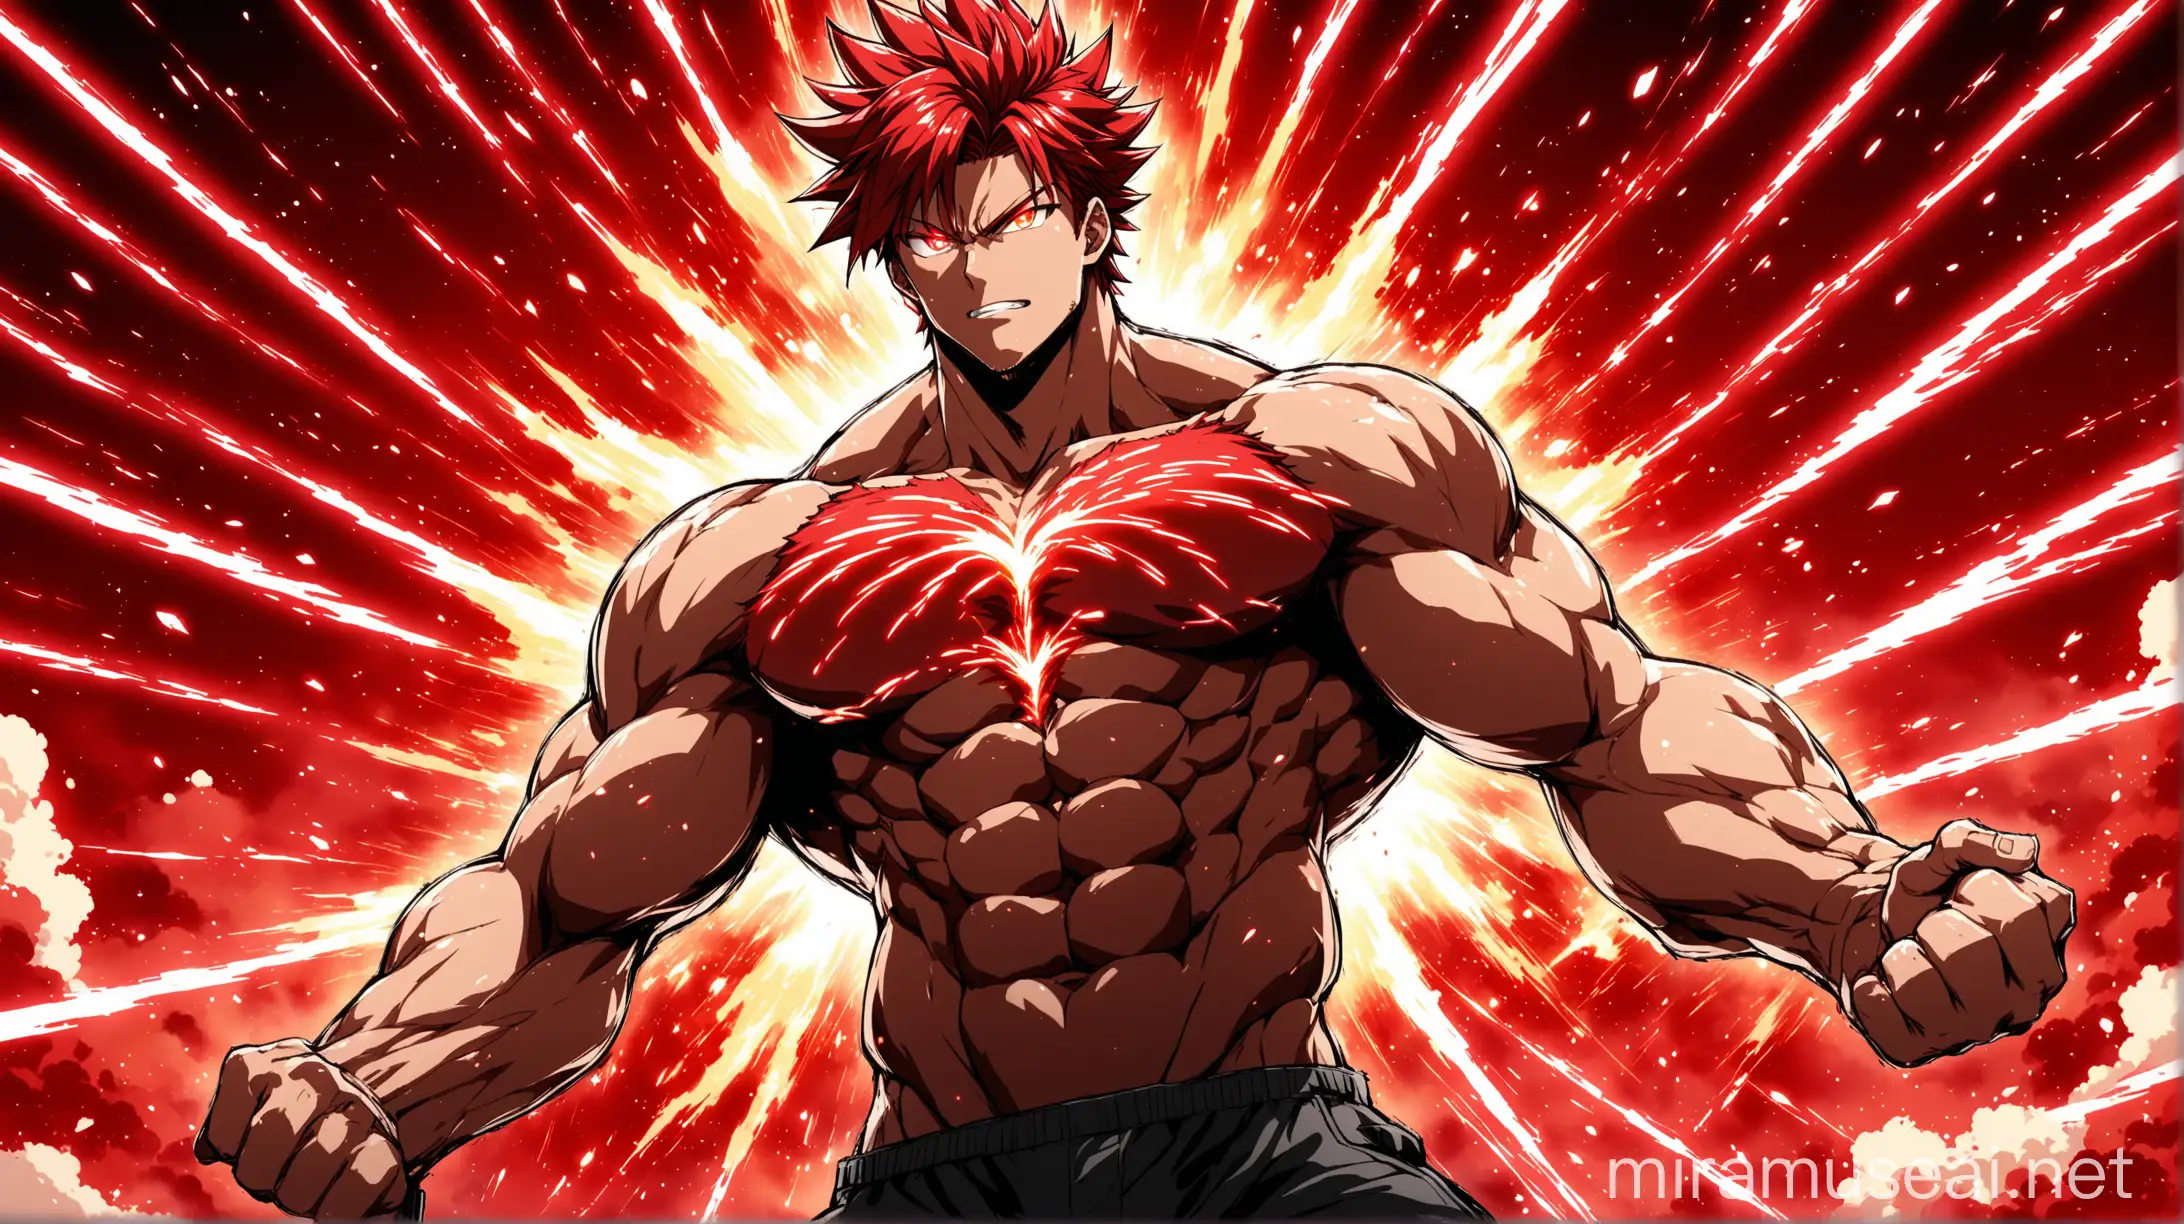 Muscular Anime Character with Glowing Red and White Accents Amid Explosive Background